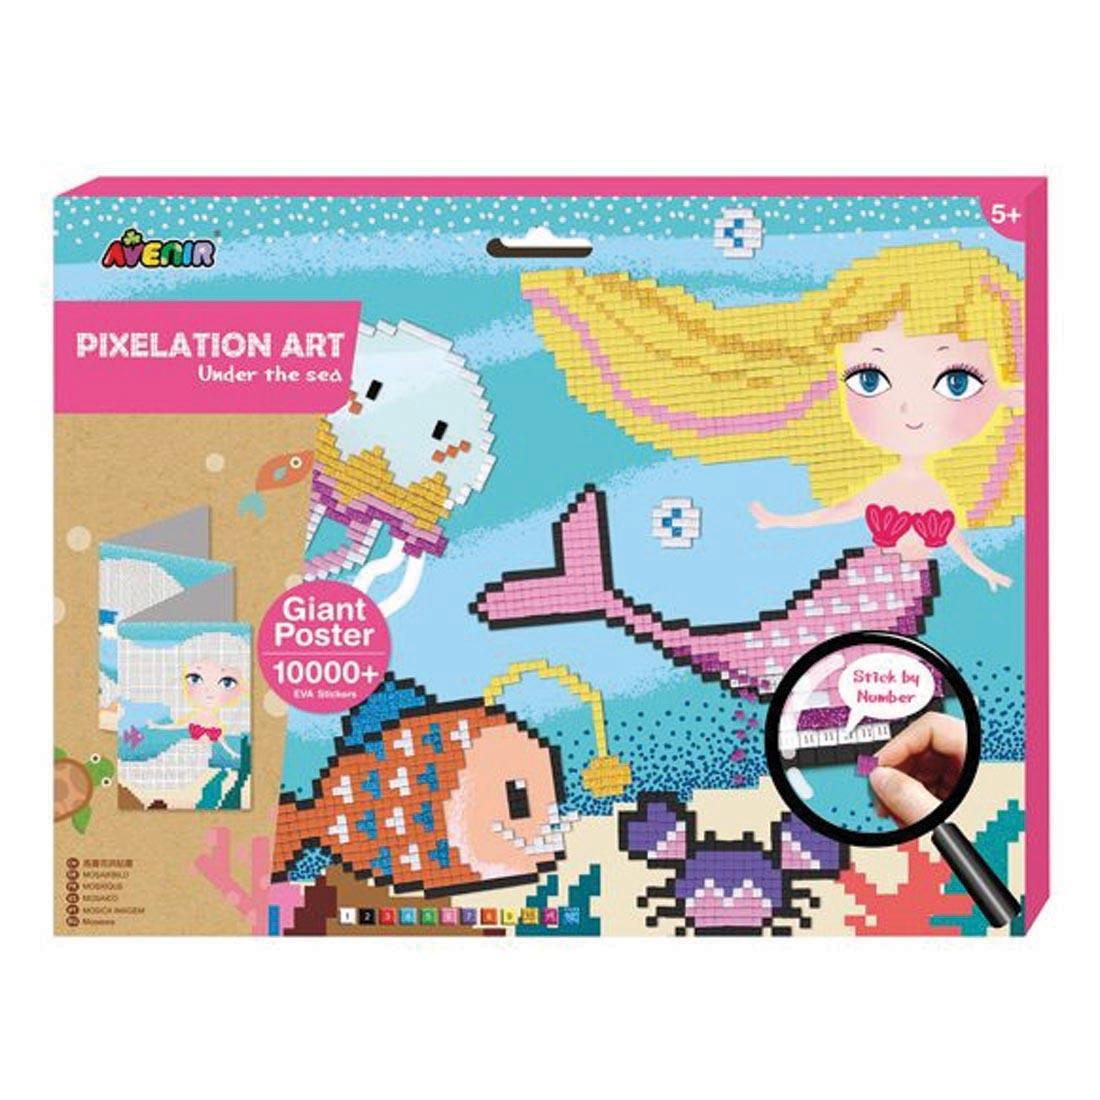 Pixelation Art Under The Sea by Avenir, front of package